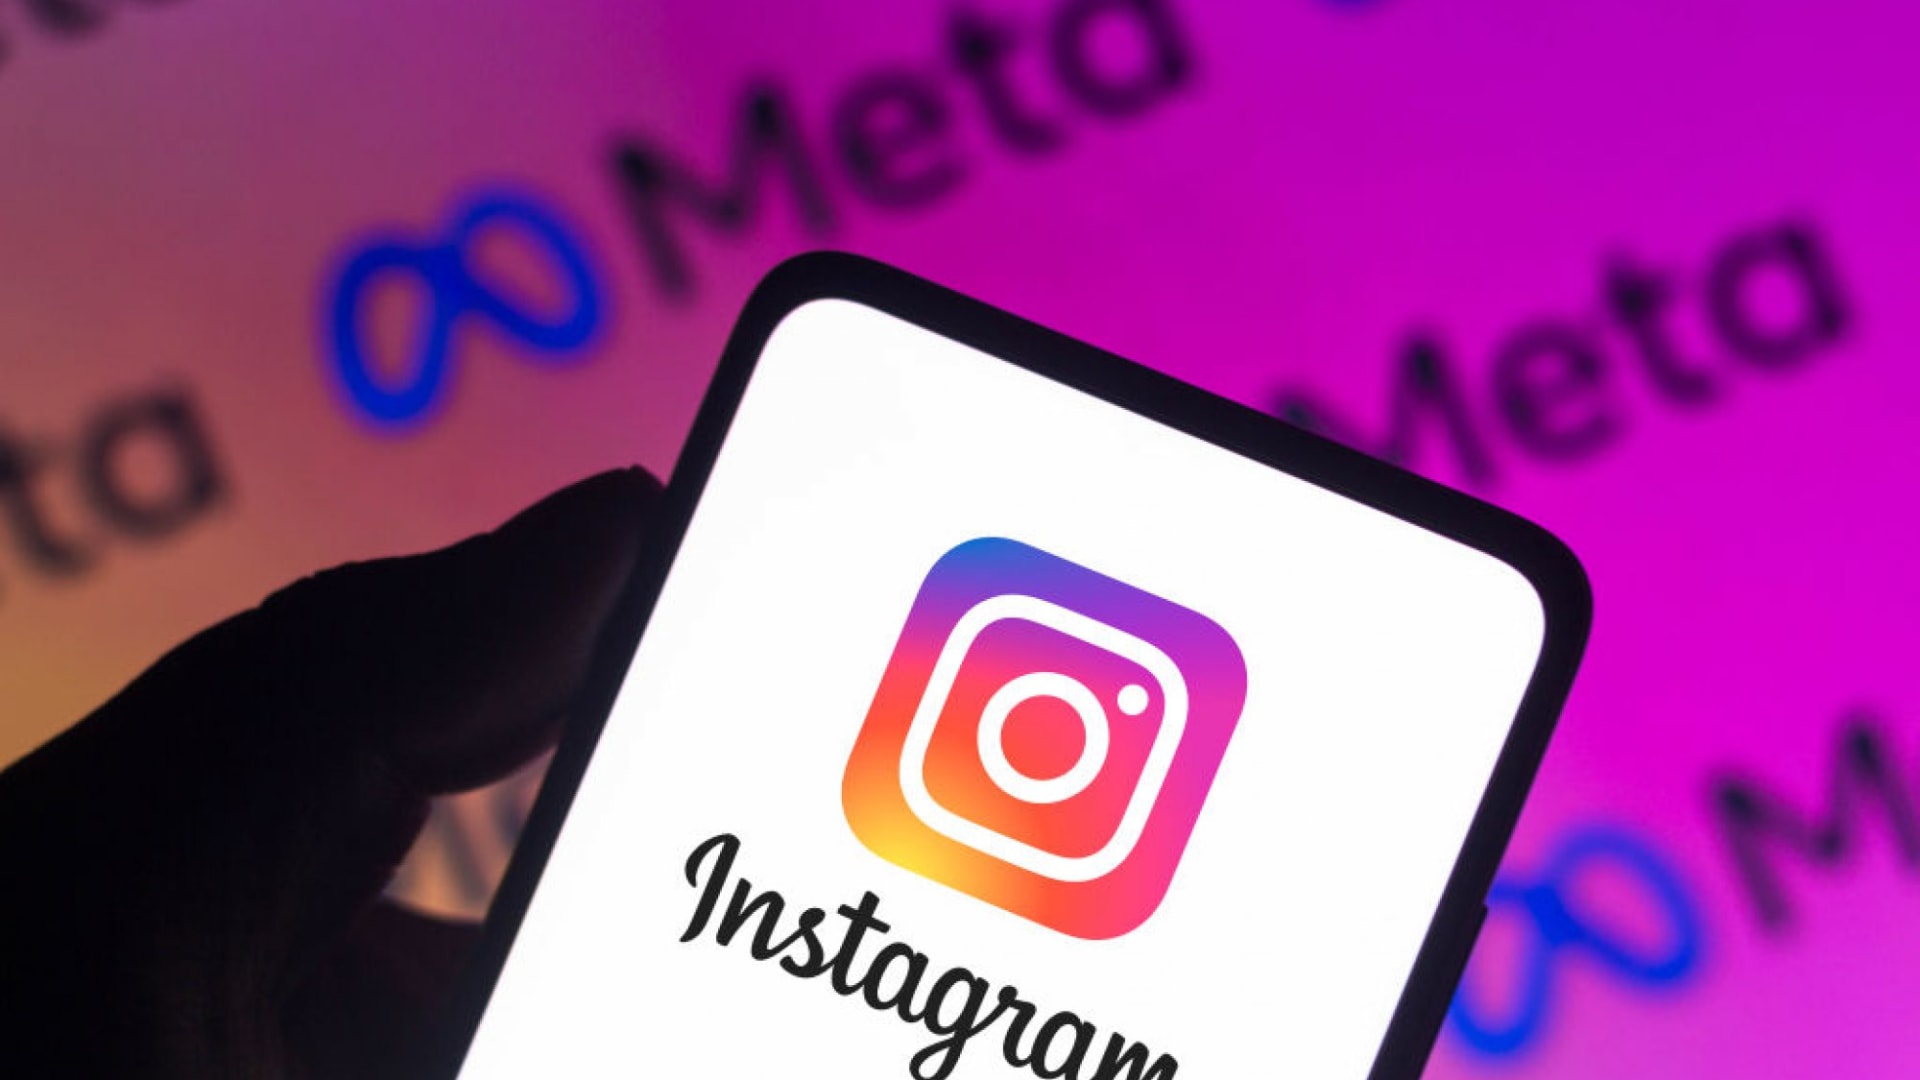 Instagram Is Finally Bringing Back the 1 Feature Everyone Wants and It's a Very Bad Sign